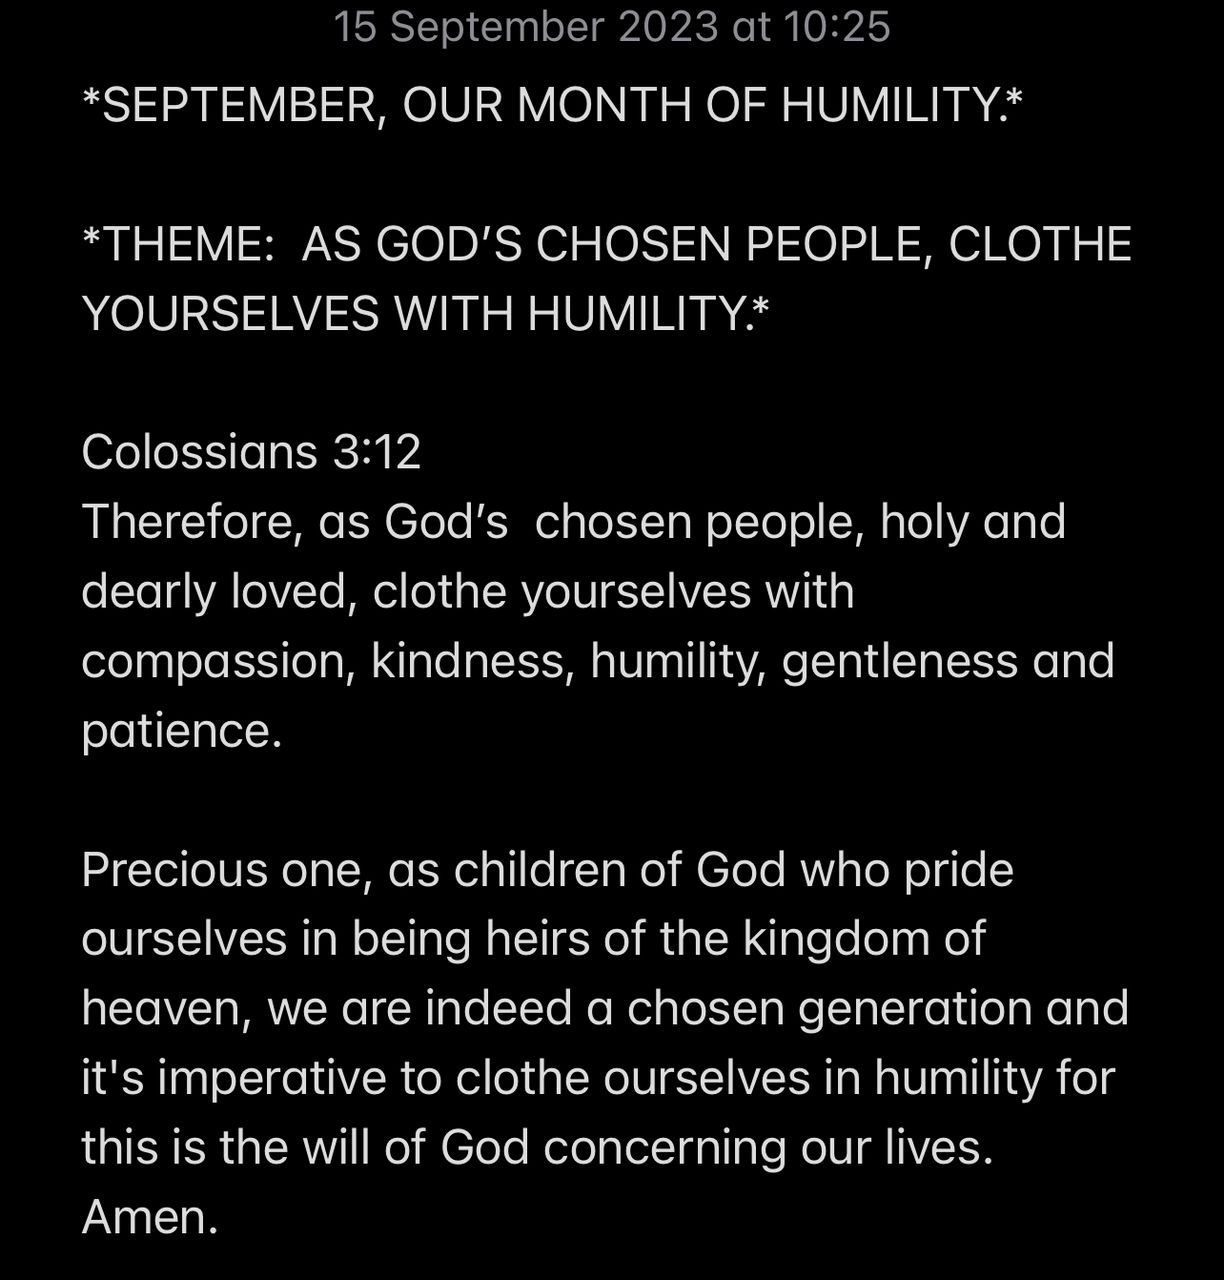 AS GOD’S CHOSEN PEOPLE, CLOTHE YOURSELVES WITH HUMILITY.